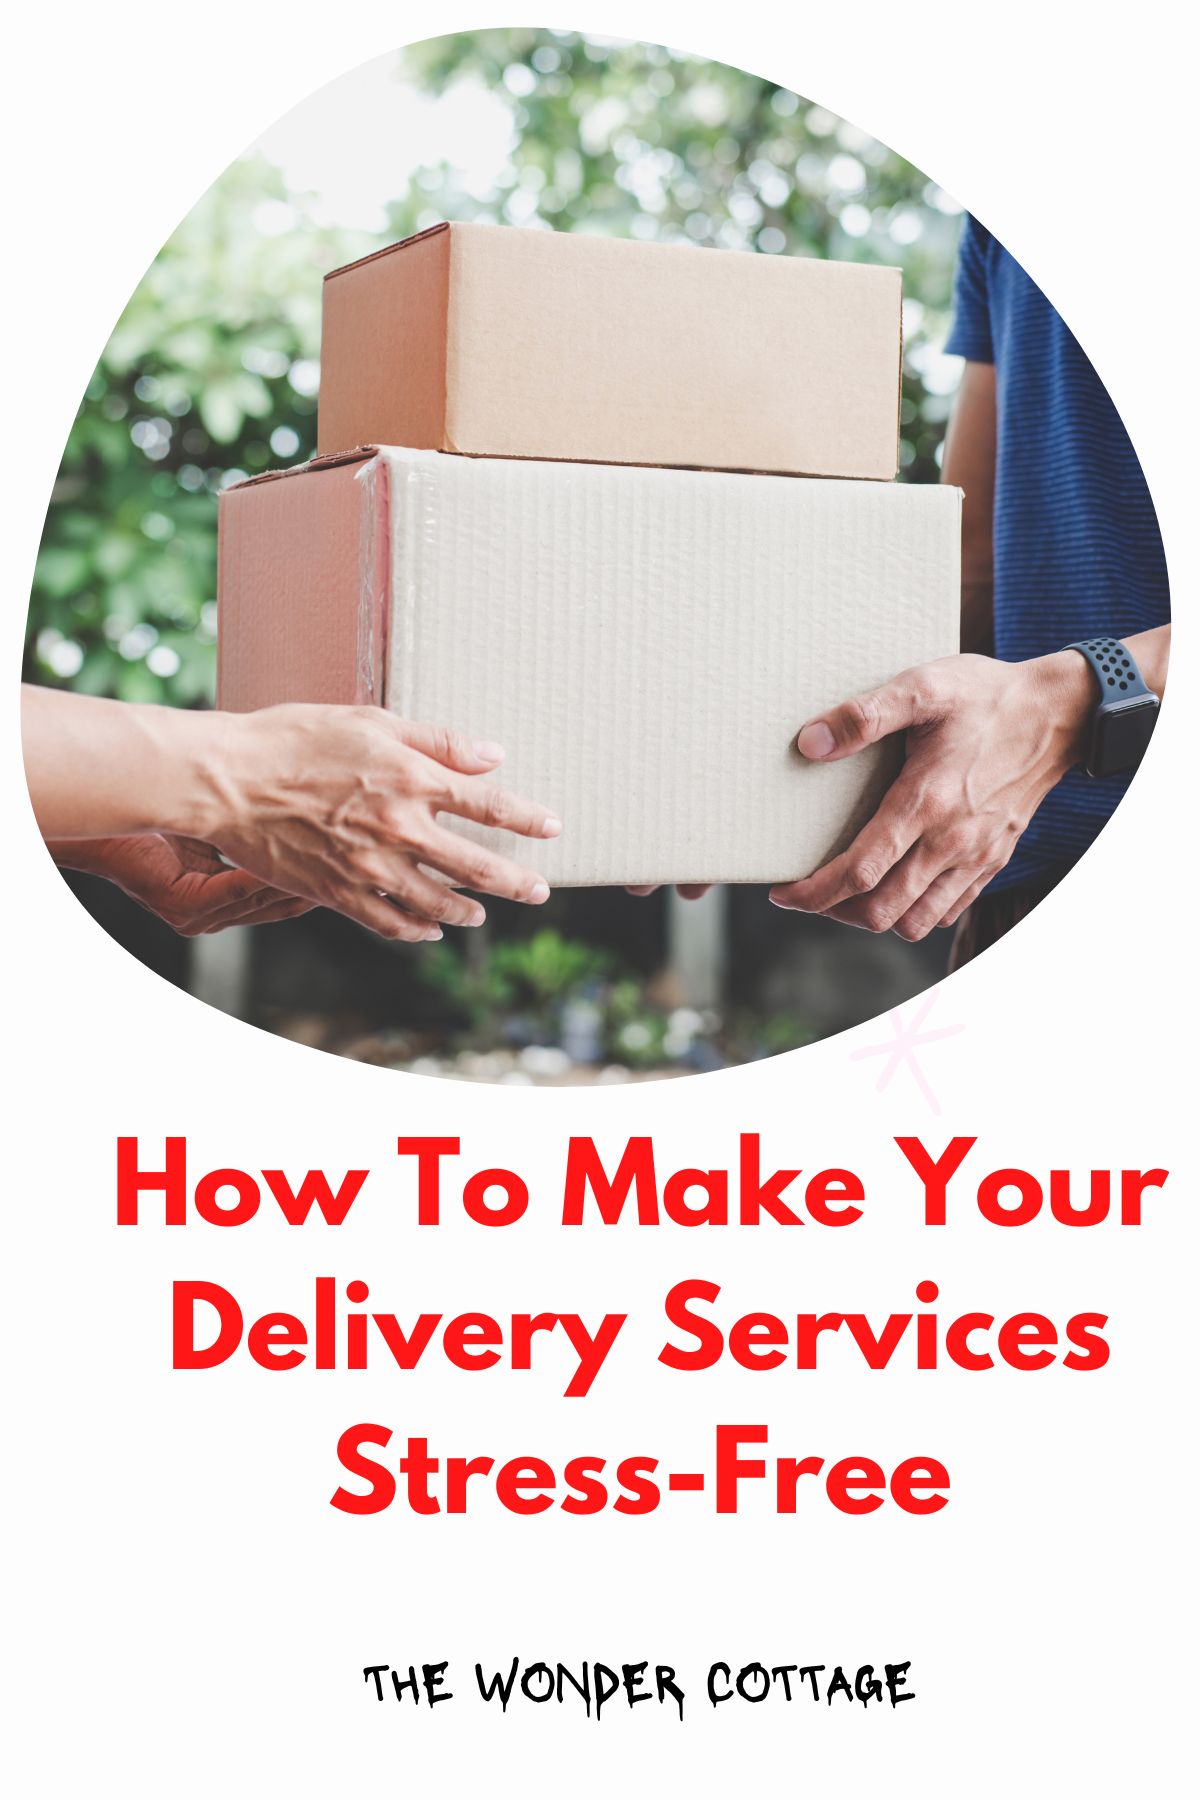 How To Make Your Delivery Services Stress-Free